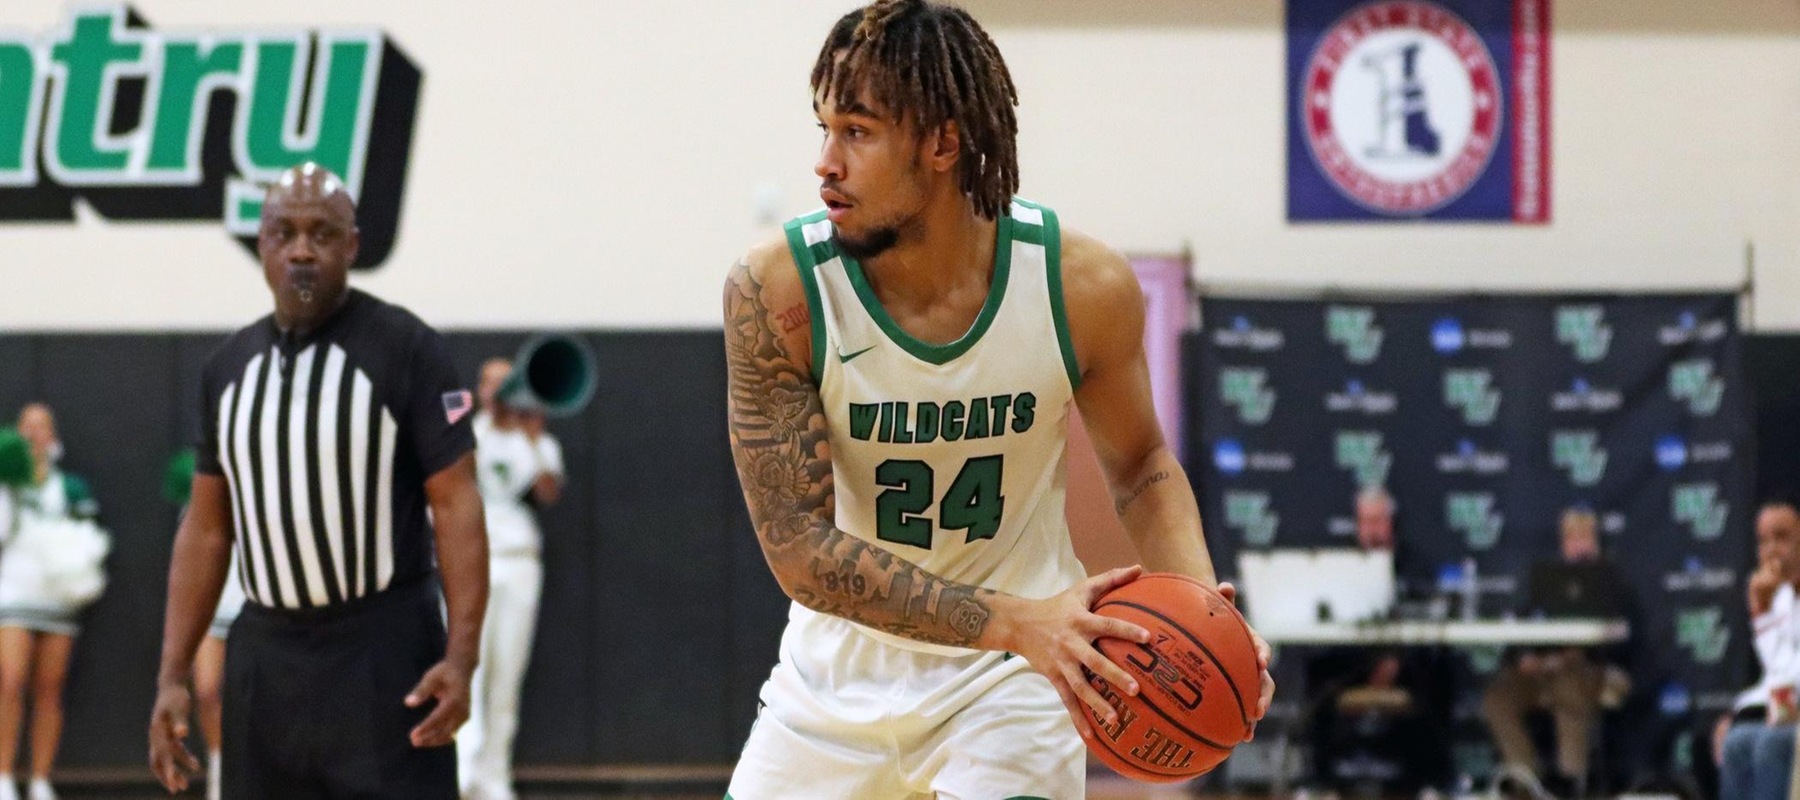 File photo of Kaleb Hedgepeth who came off the bench to score 12 points with 5 rebounds and 2 blocks at Jefferson. Copyright 2023; Wilmington University. All rights reserved. Photo by Dan Lauletta. December 9, 2023 vs. Lock Haven.